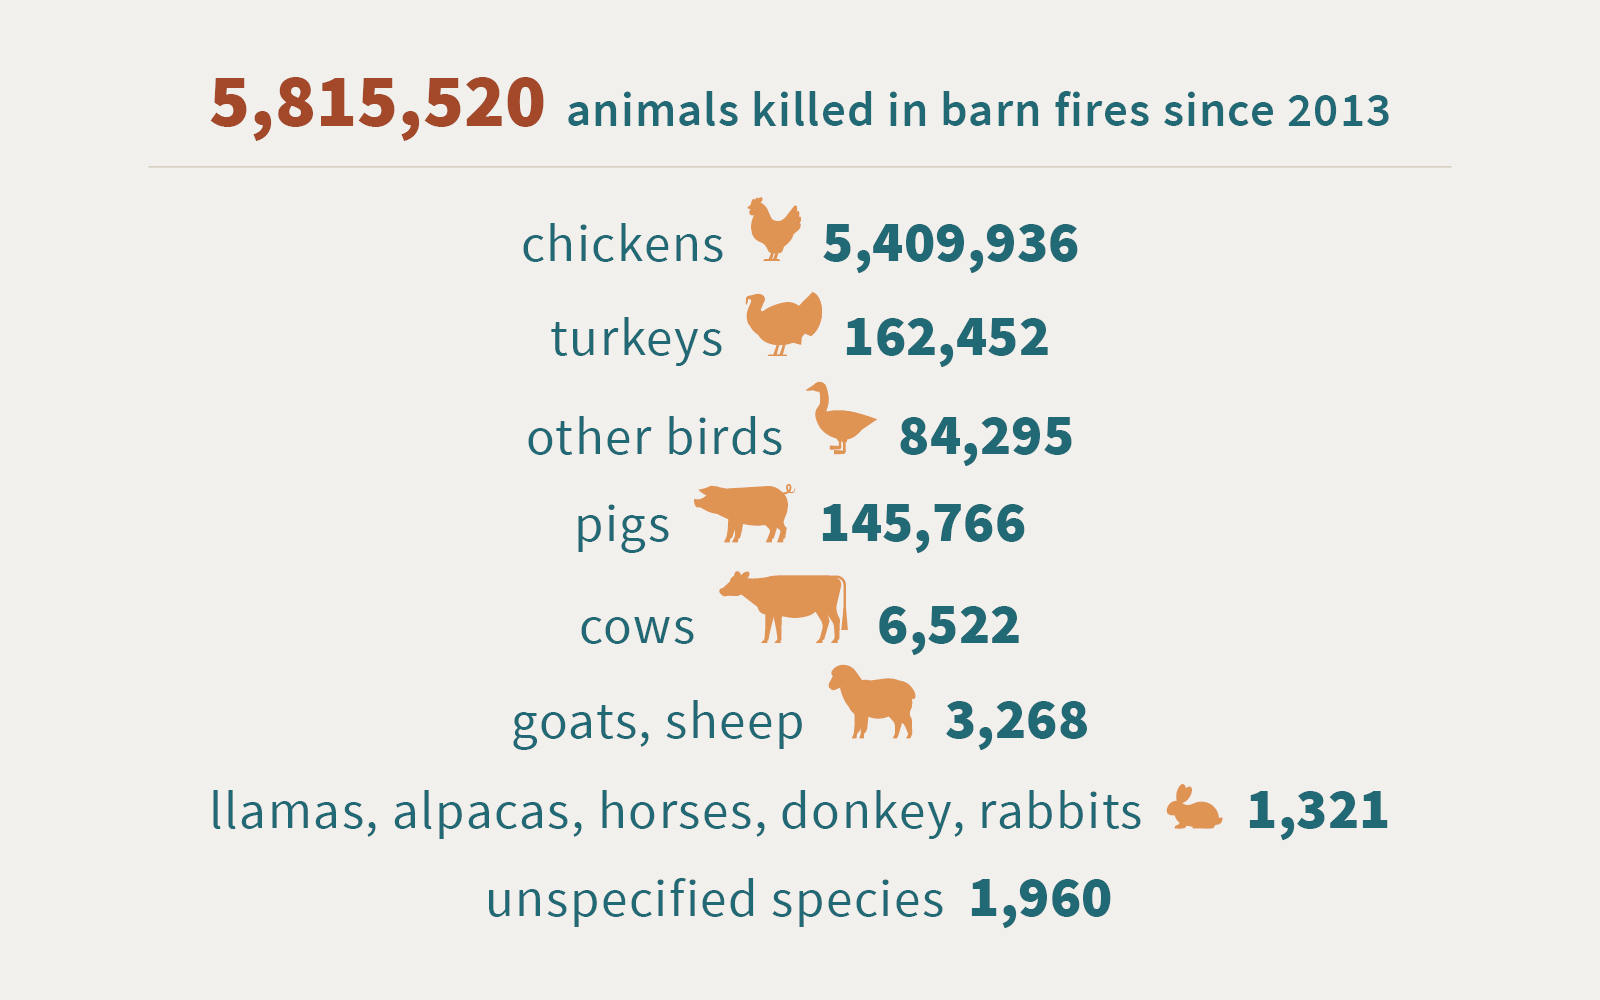 INFOGRAPHIC: Total Number of Animals Killed in Barn Fires Since 2013